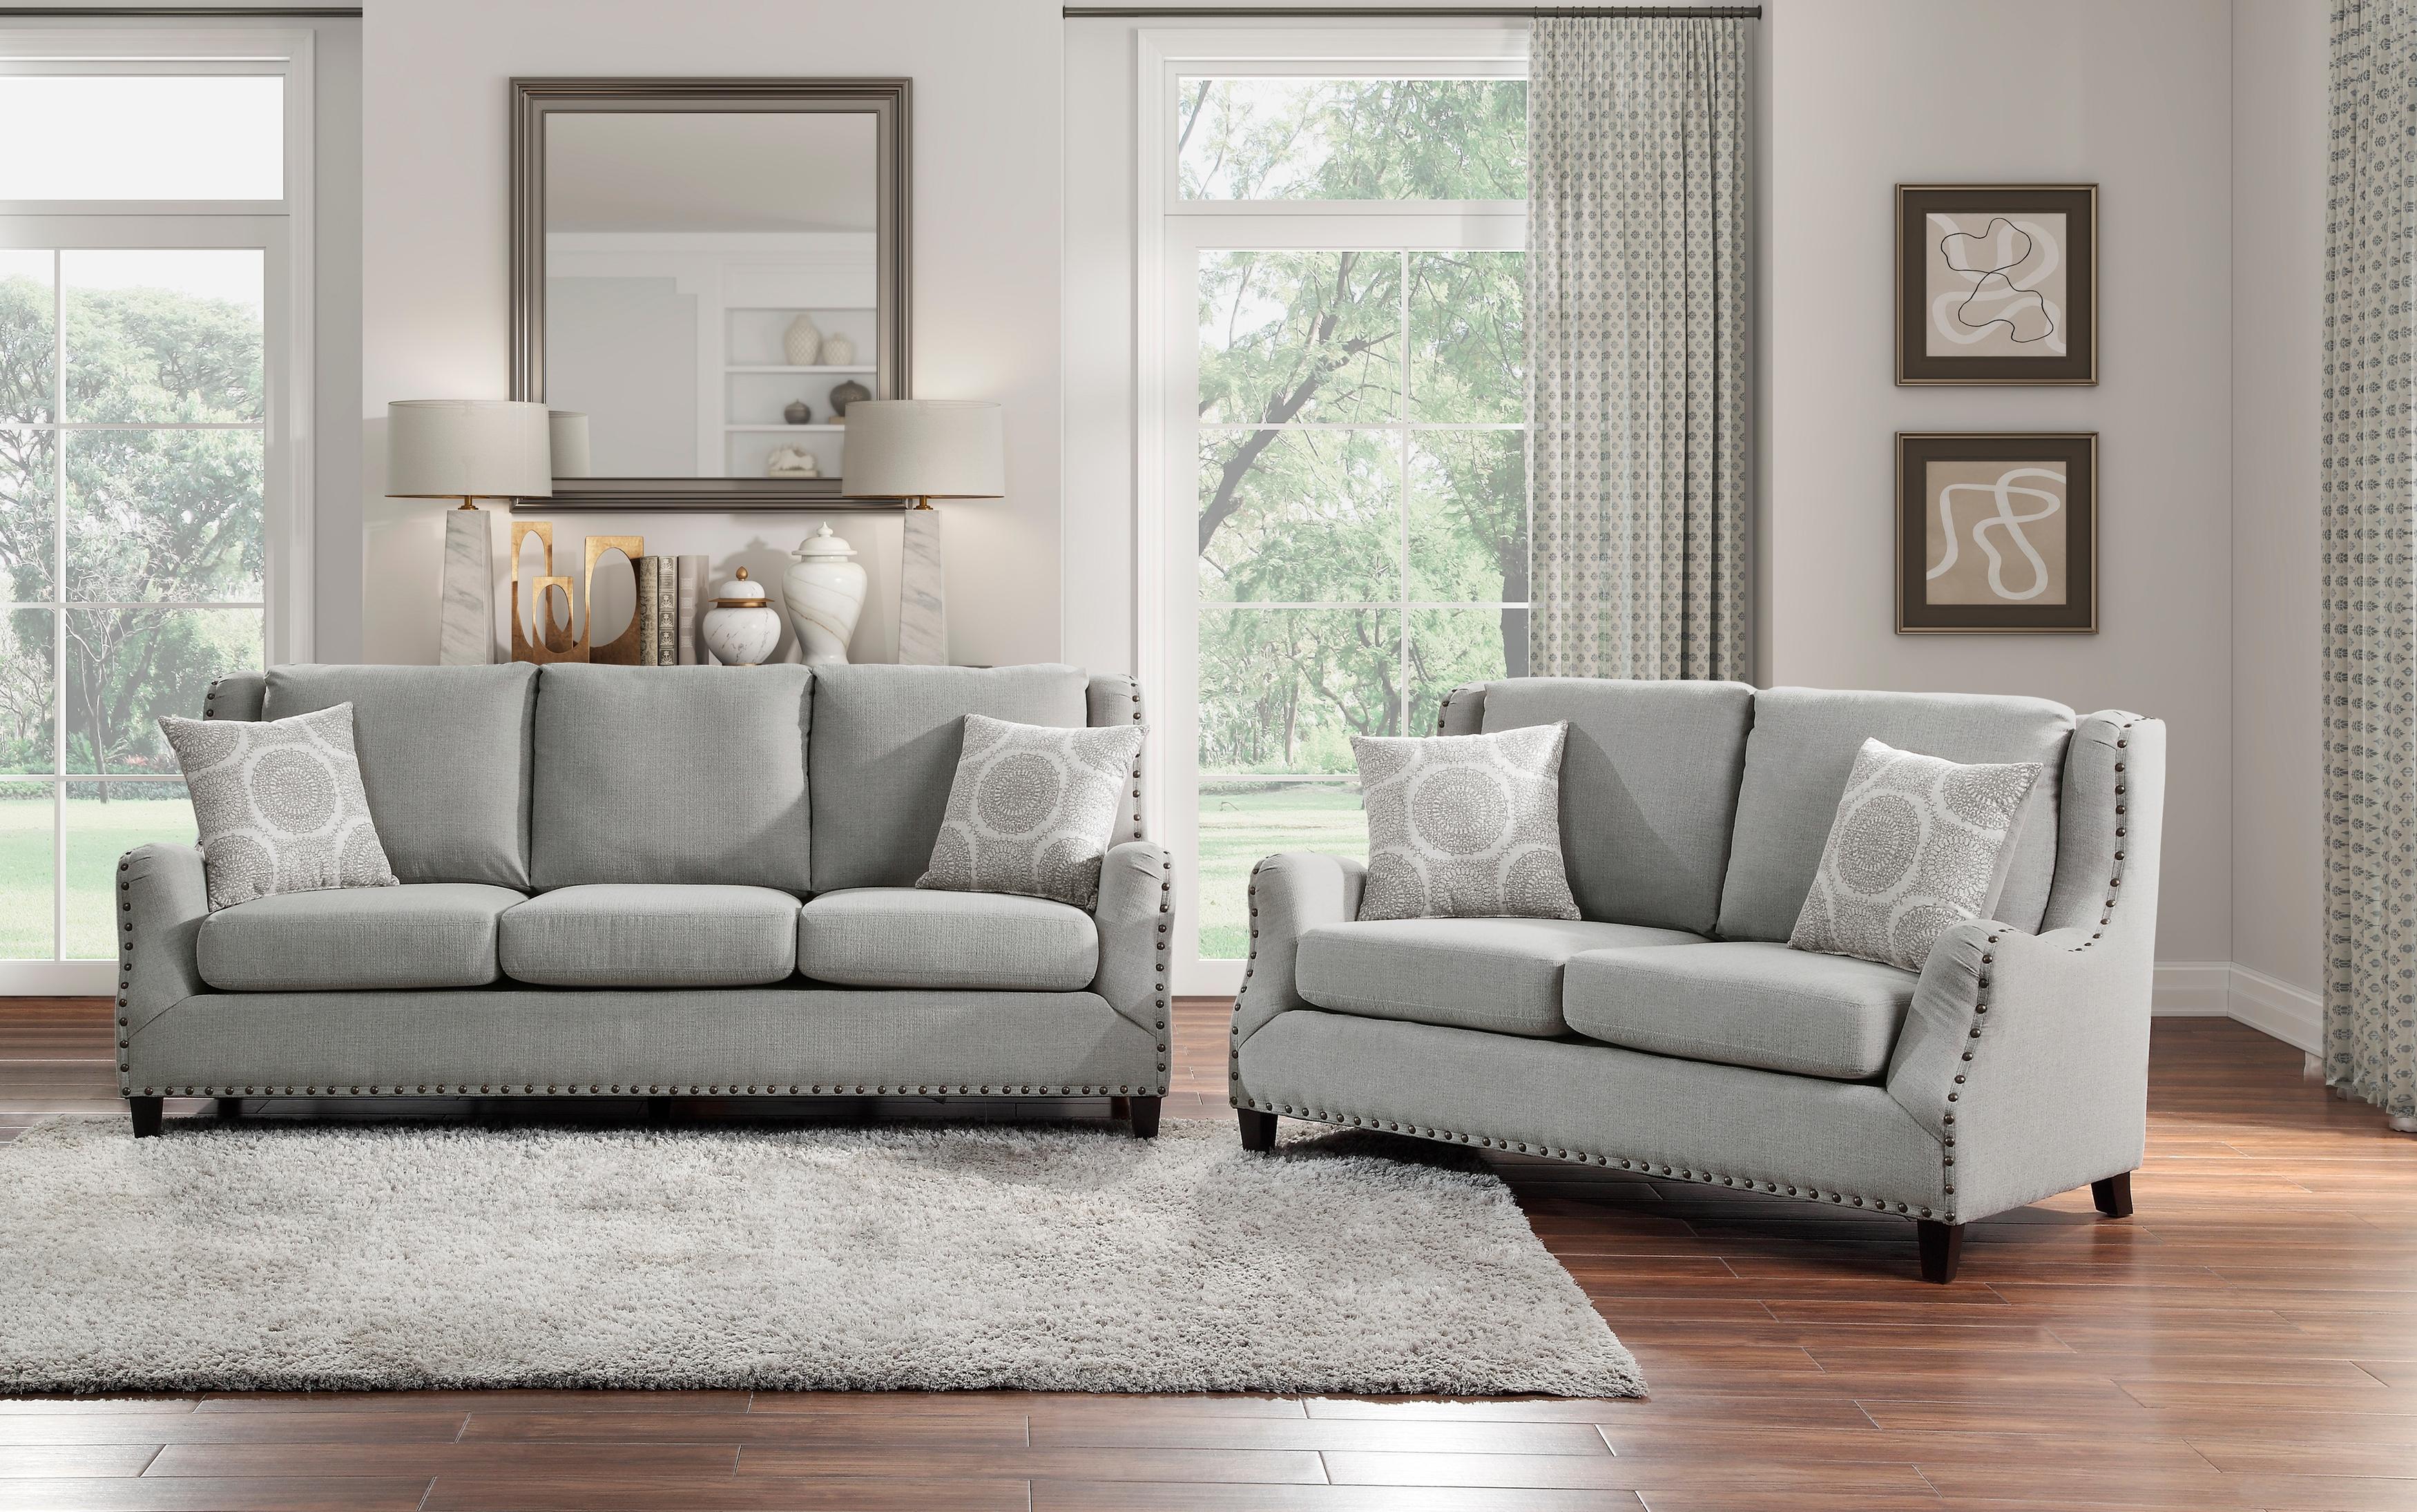 Traditional Living Room Set 9339GY-2PC Halton 9339GY-2PC in Gray 